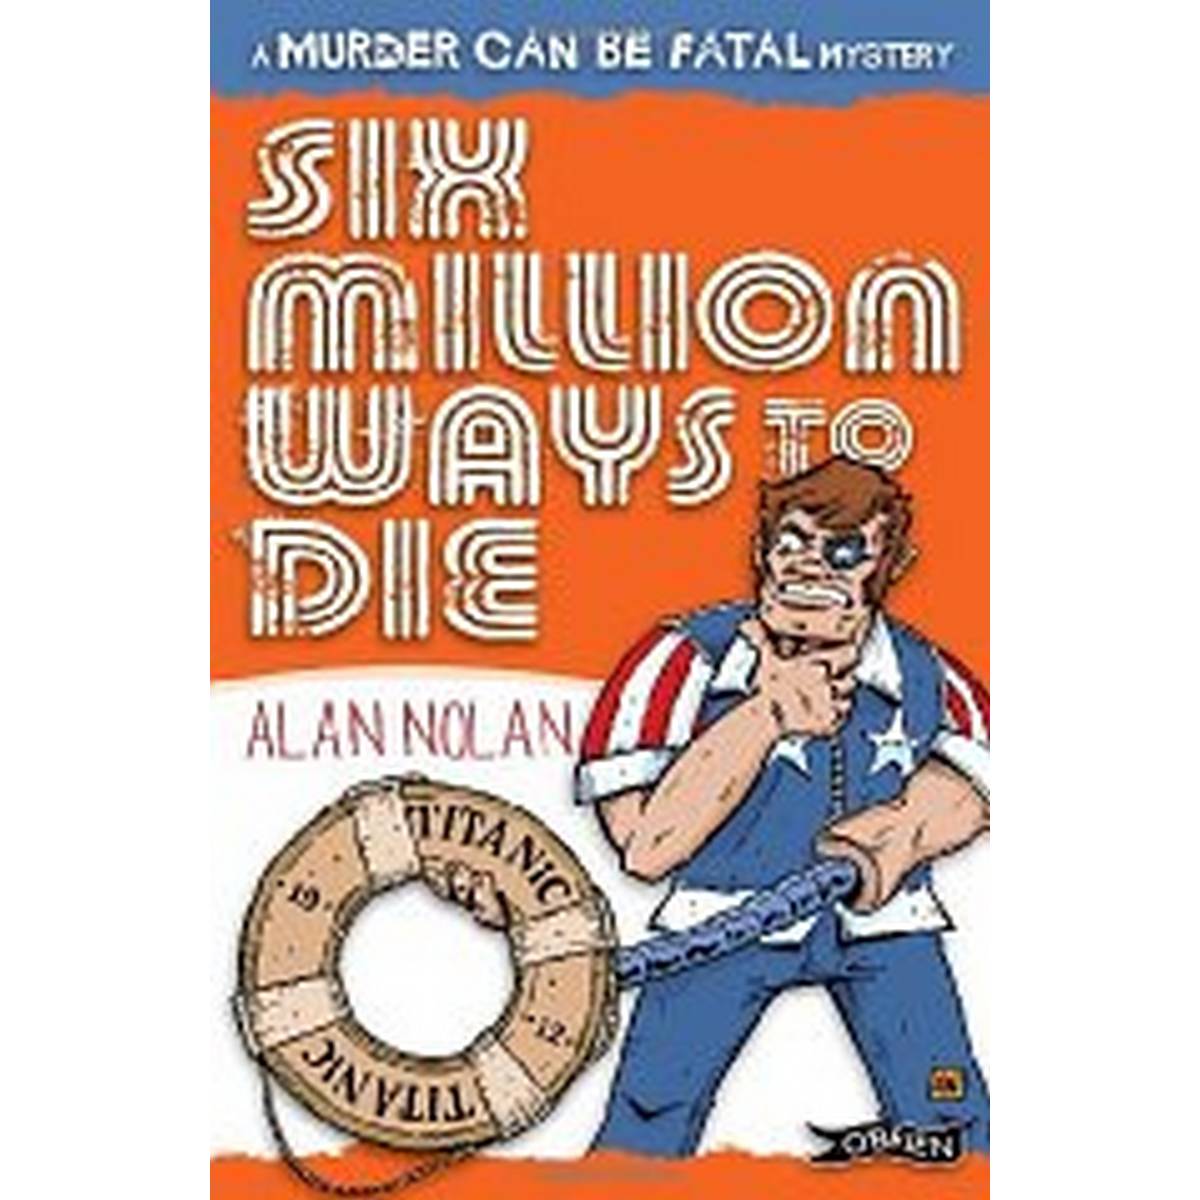 Six Million Ways to Die (A Murder Can Be Fatal Mystery)